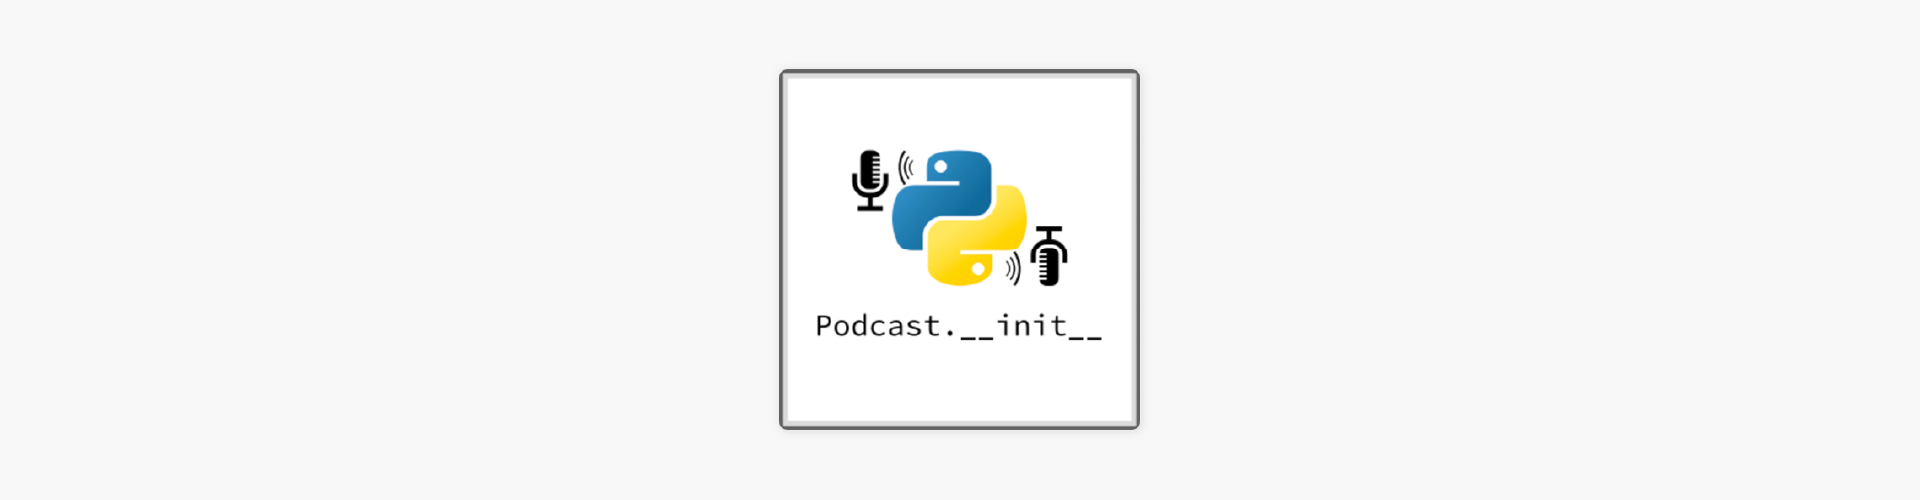 The Python Podcast.init Cover